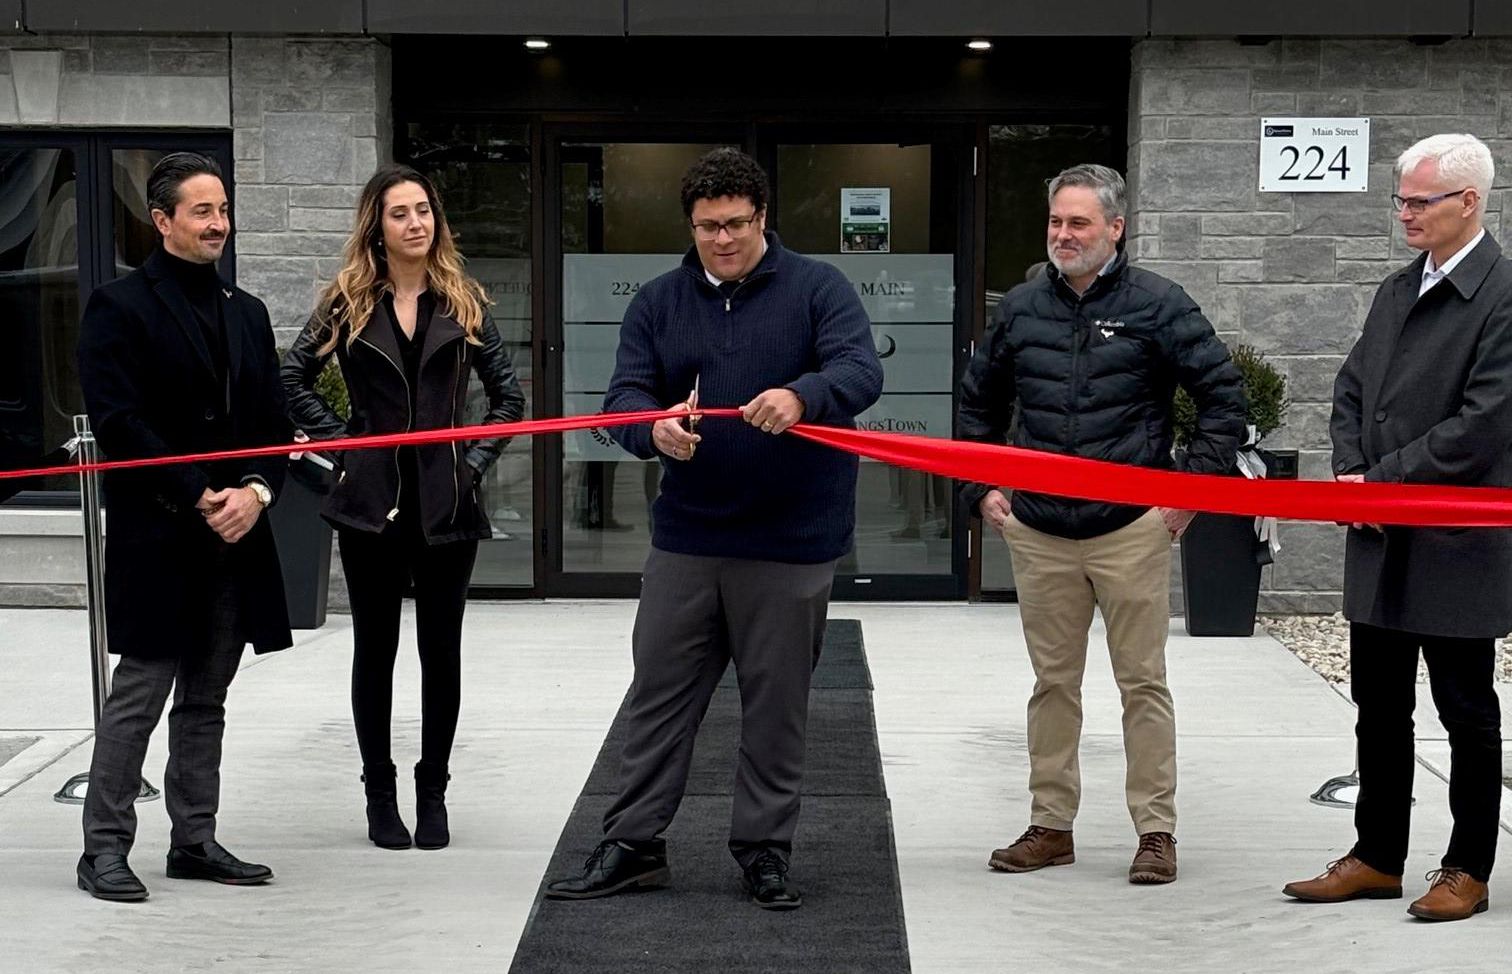 KINGSVILLE WELCOMES TWO NEW CONDO BUILDINGS